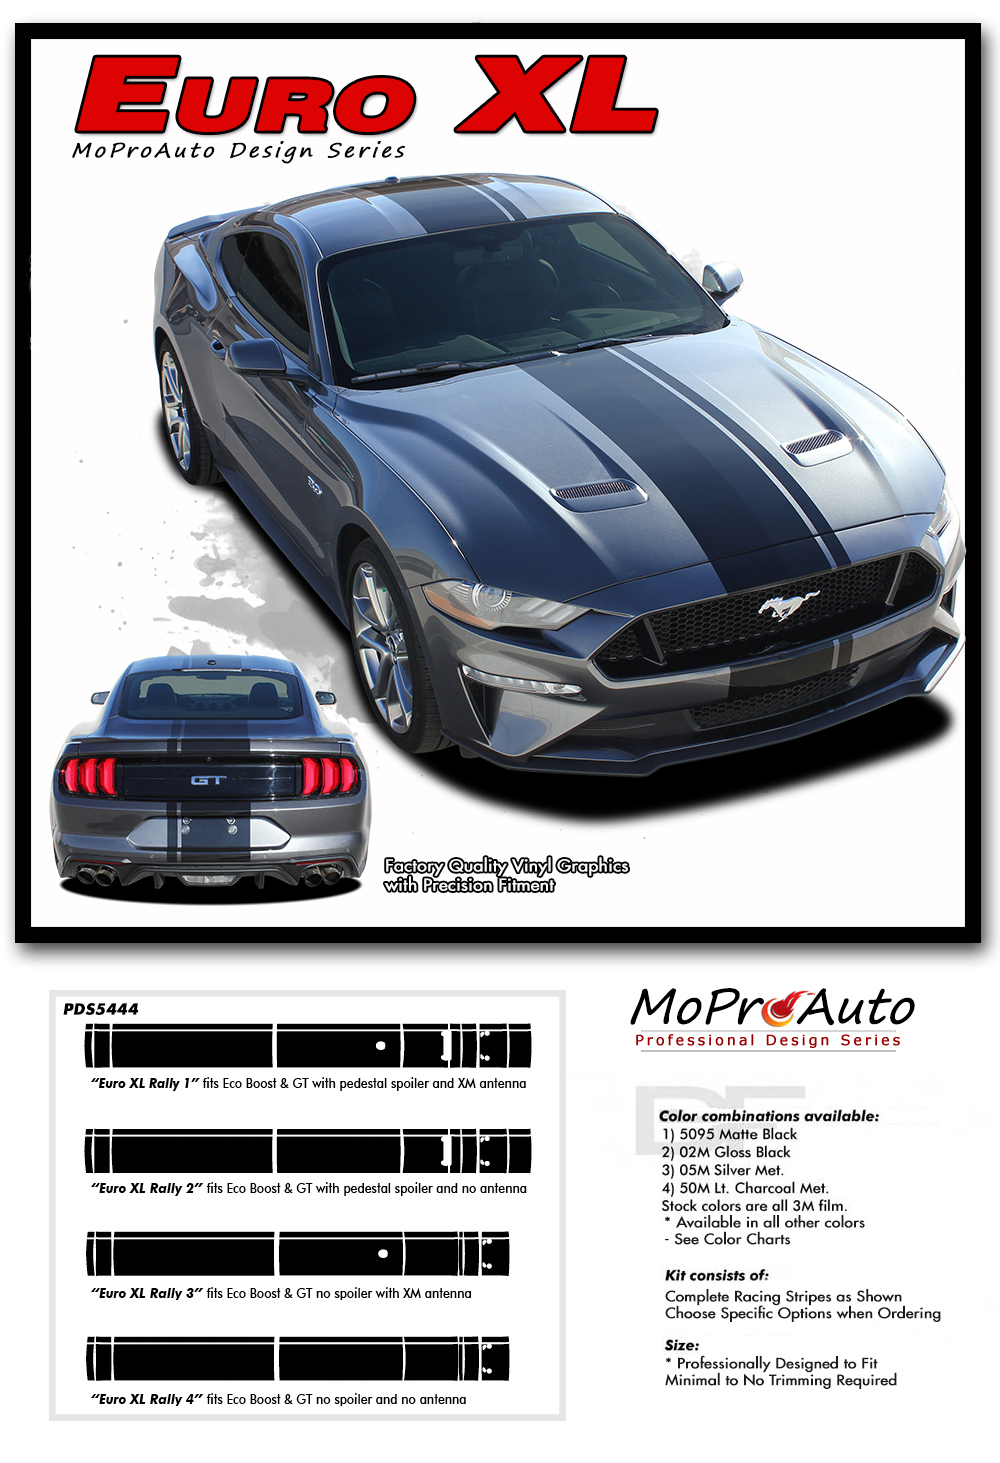 2018 2019 2020 2021 2022 EURO XL RALLY OEM Style Racing Stripes for Ford Mustang - MoProAuto Pro Design Series Vinyl Graphics, Stripes and Decals Kit